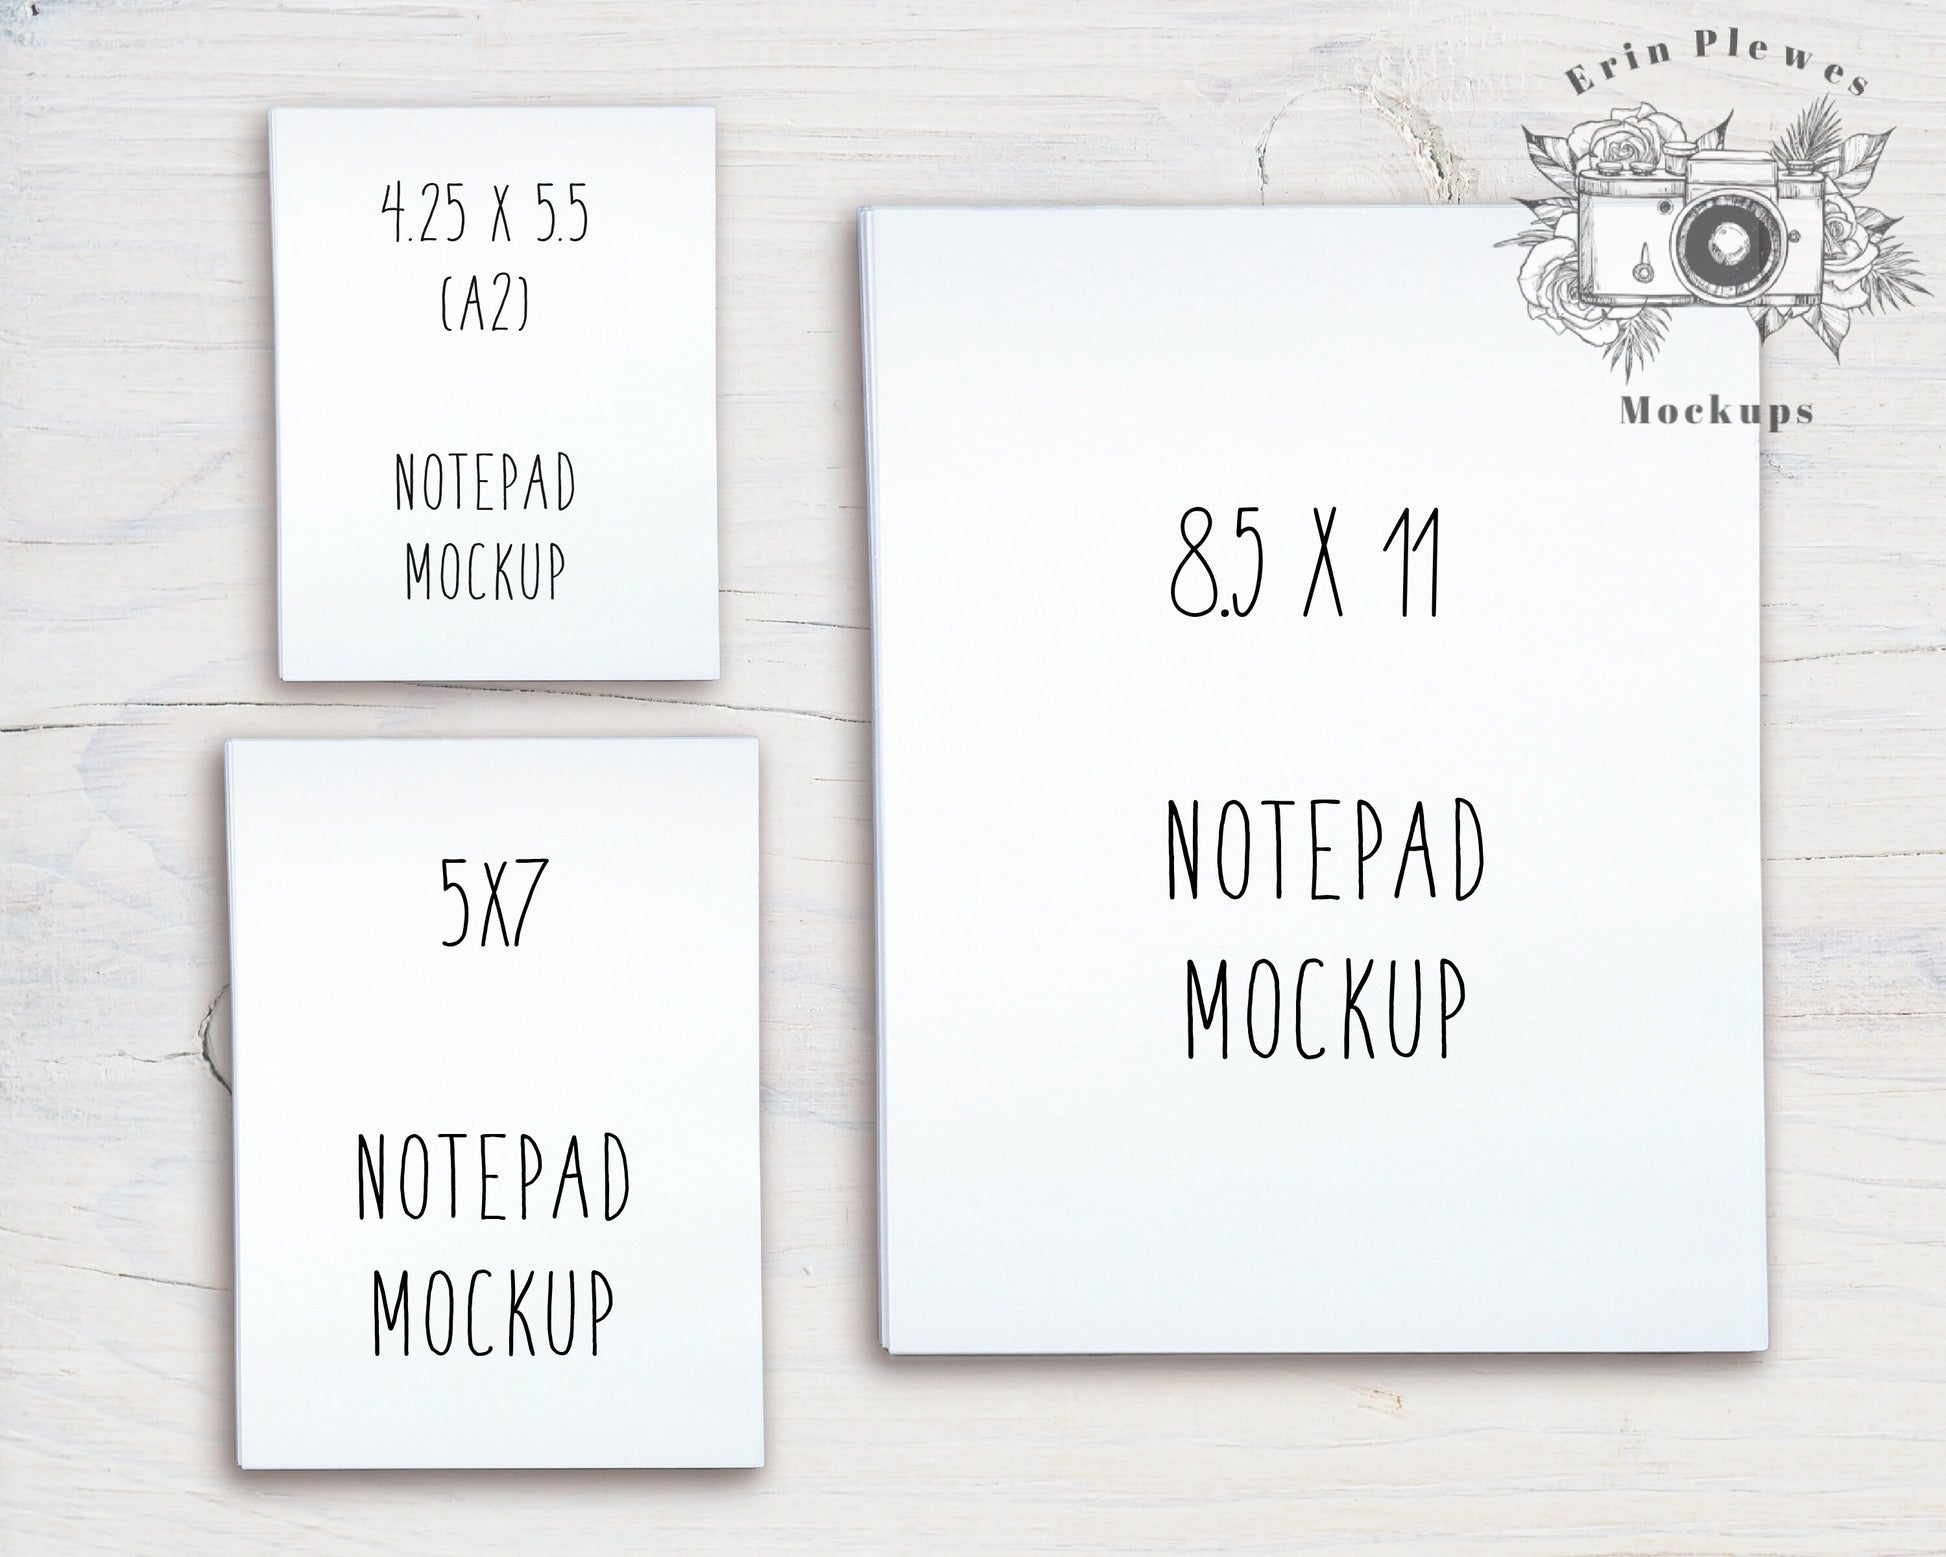 Notepad Mockup Comparison, 5x7 and 4.25 x 5.5 and 8.5 x 11 notepad Mock Up, A2 and A7 Flatlay, Instant Digital Download Jpeg